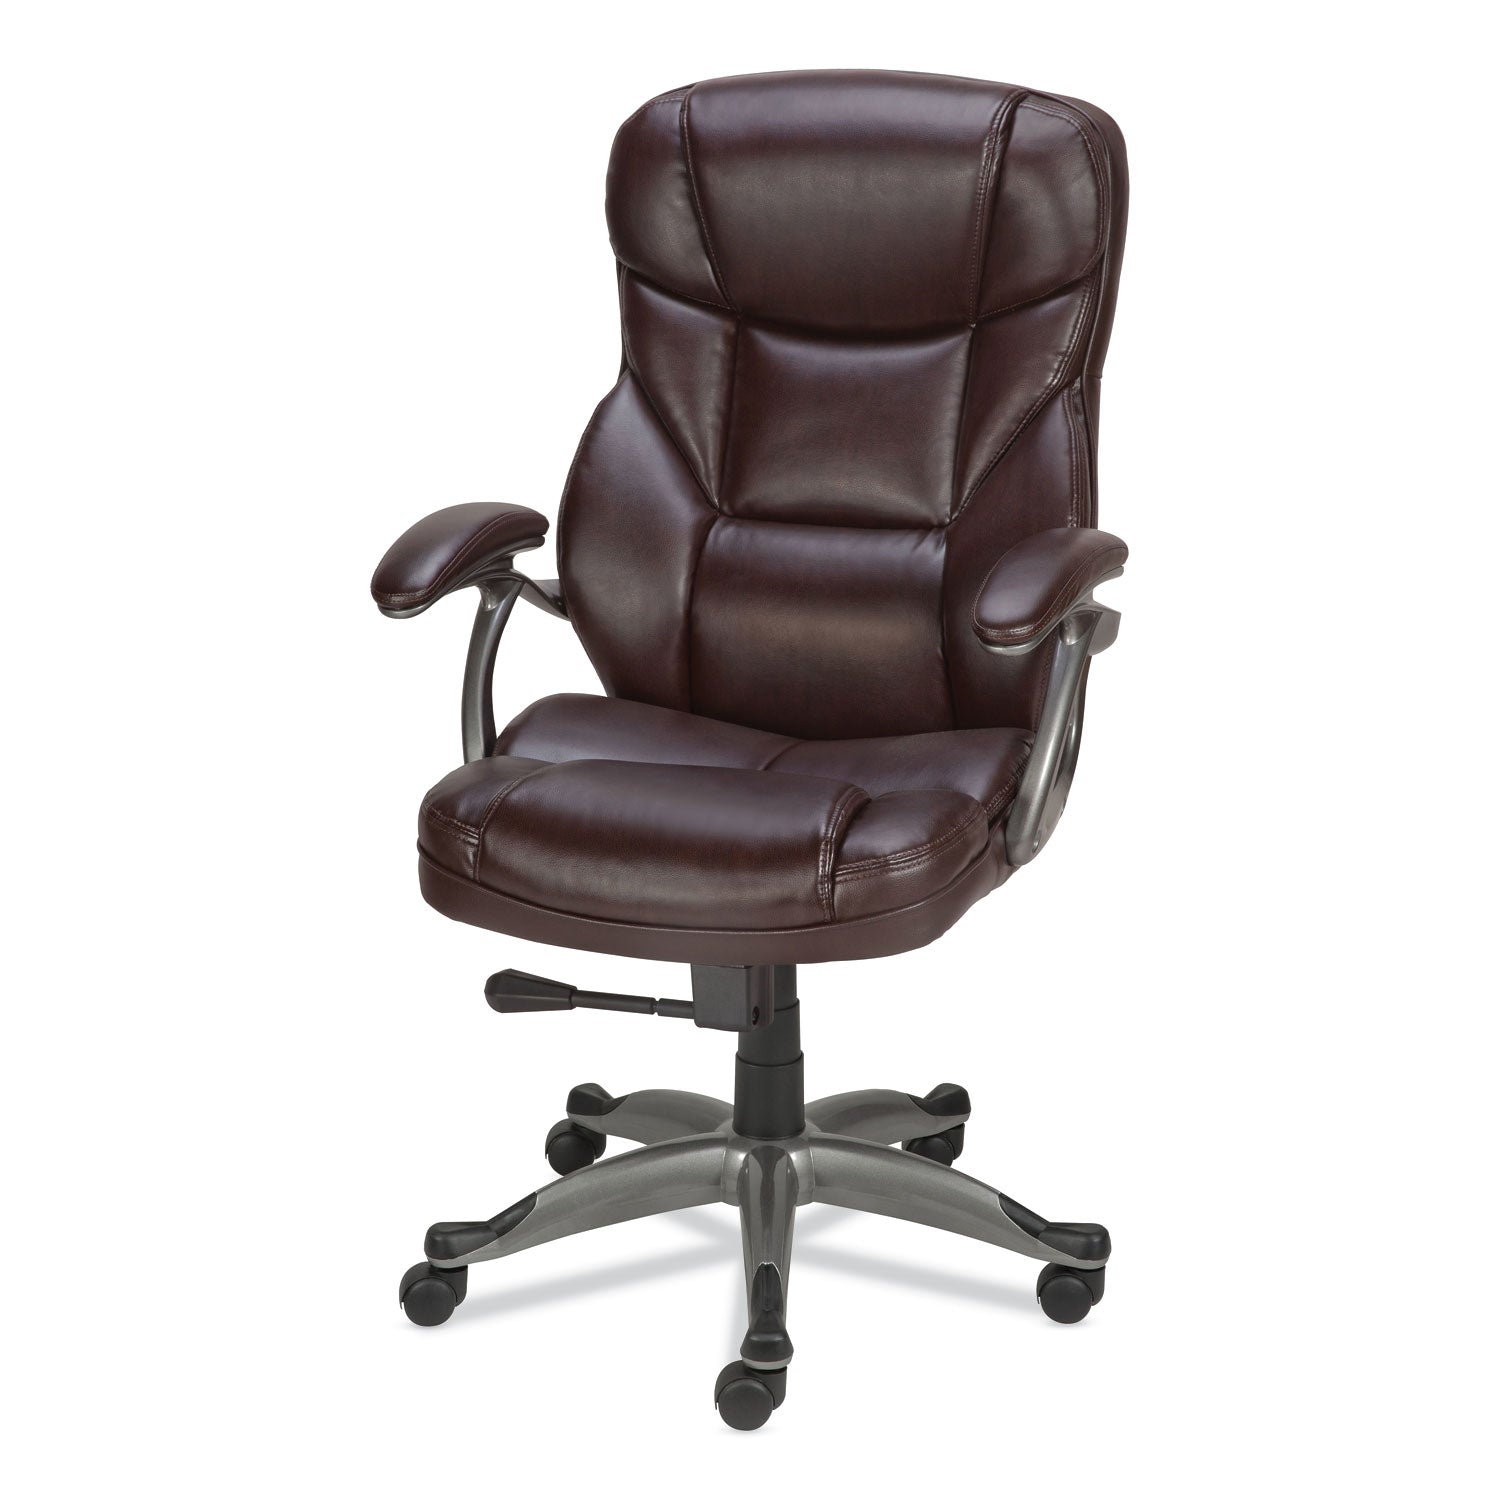 Alera Birns Series High-Back Task Chair, Supports Up to 250 lb, 18.11" to 22.05" Seat Height, Brown Seat/Back, Chrome Base - 3